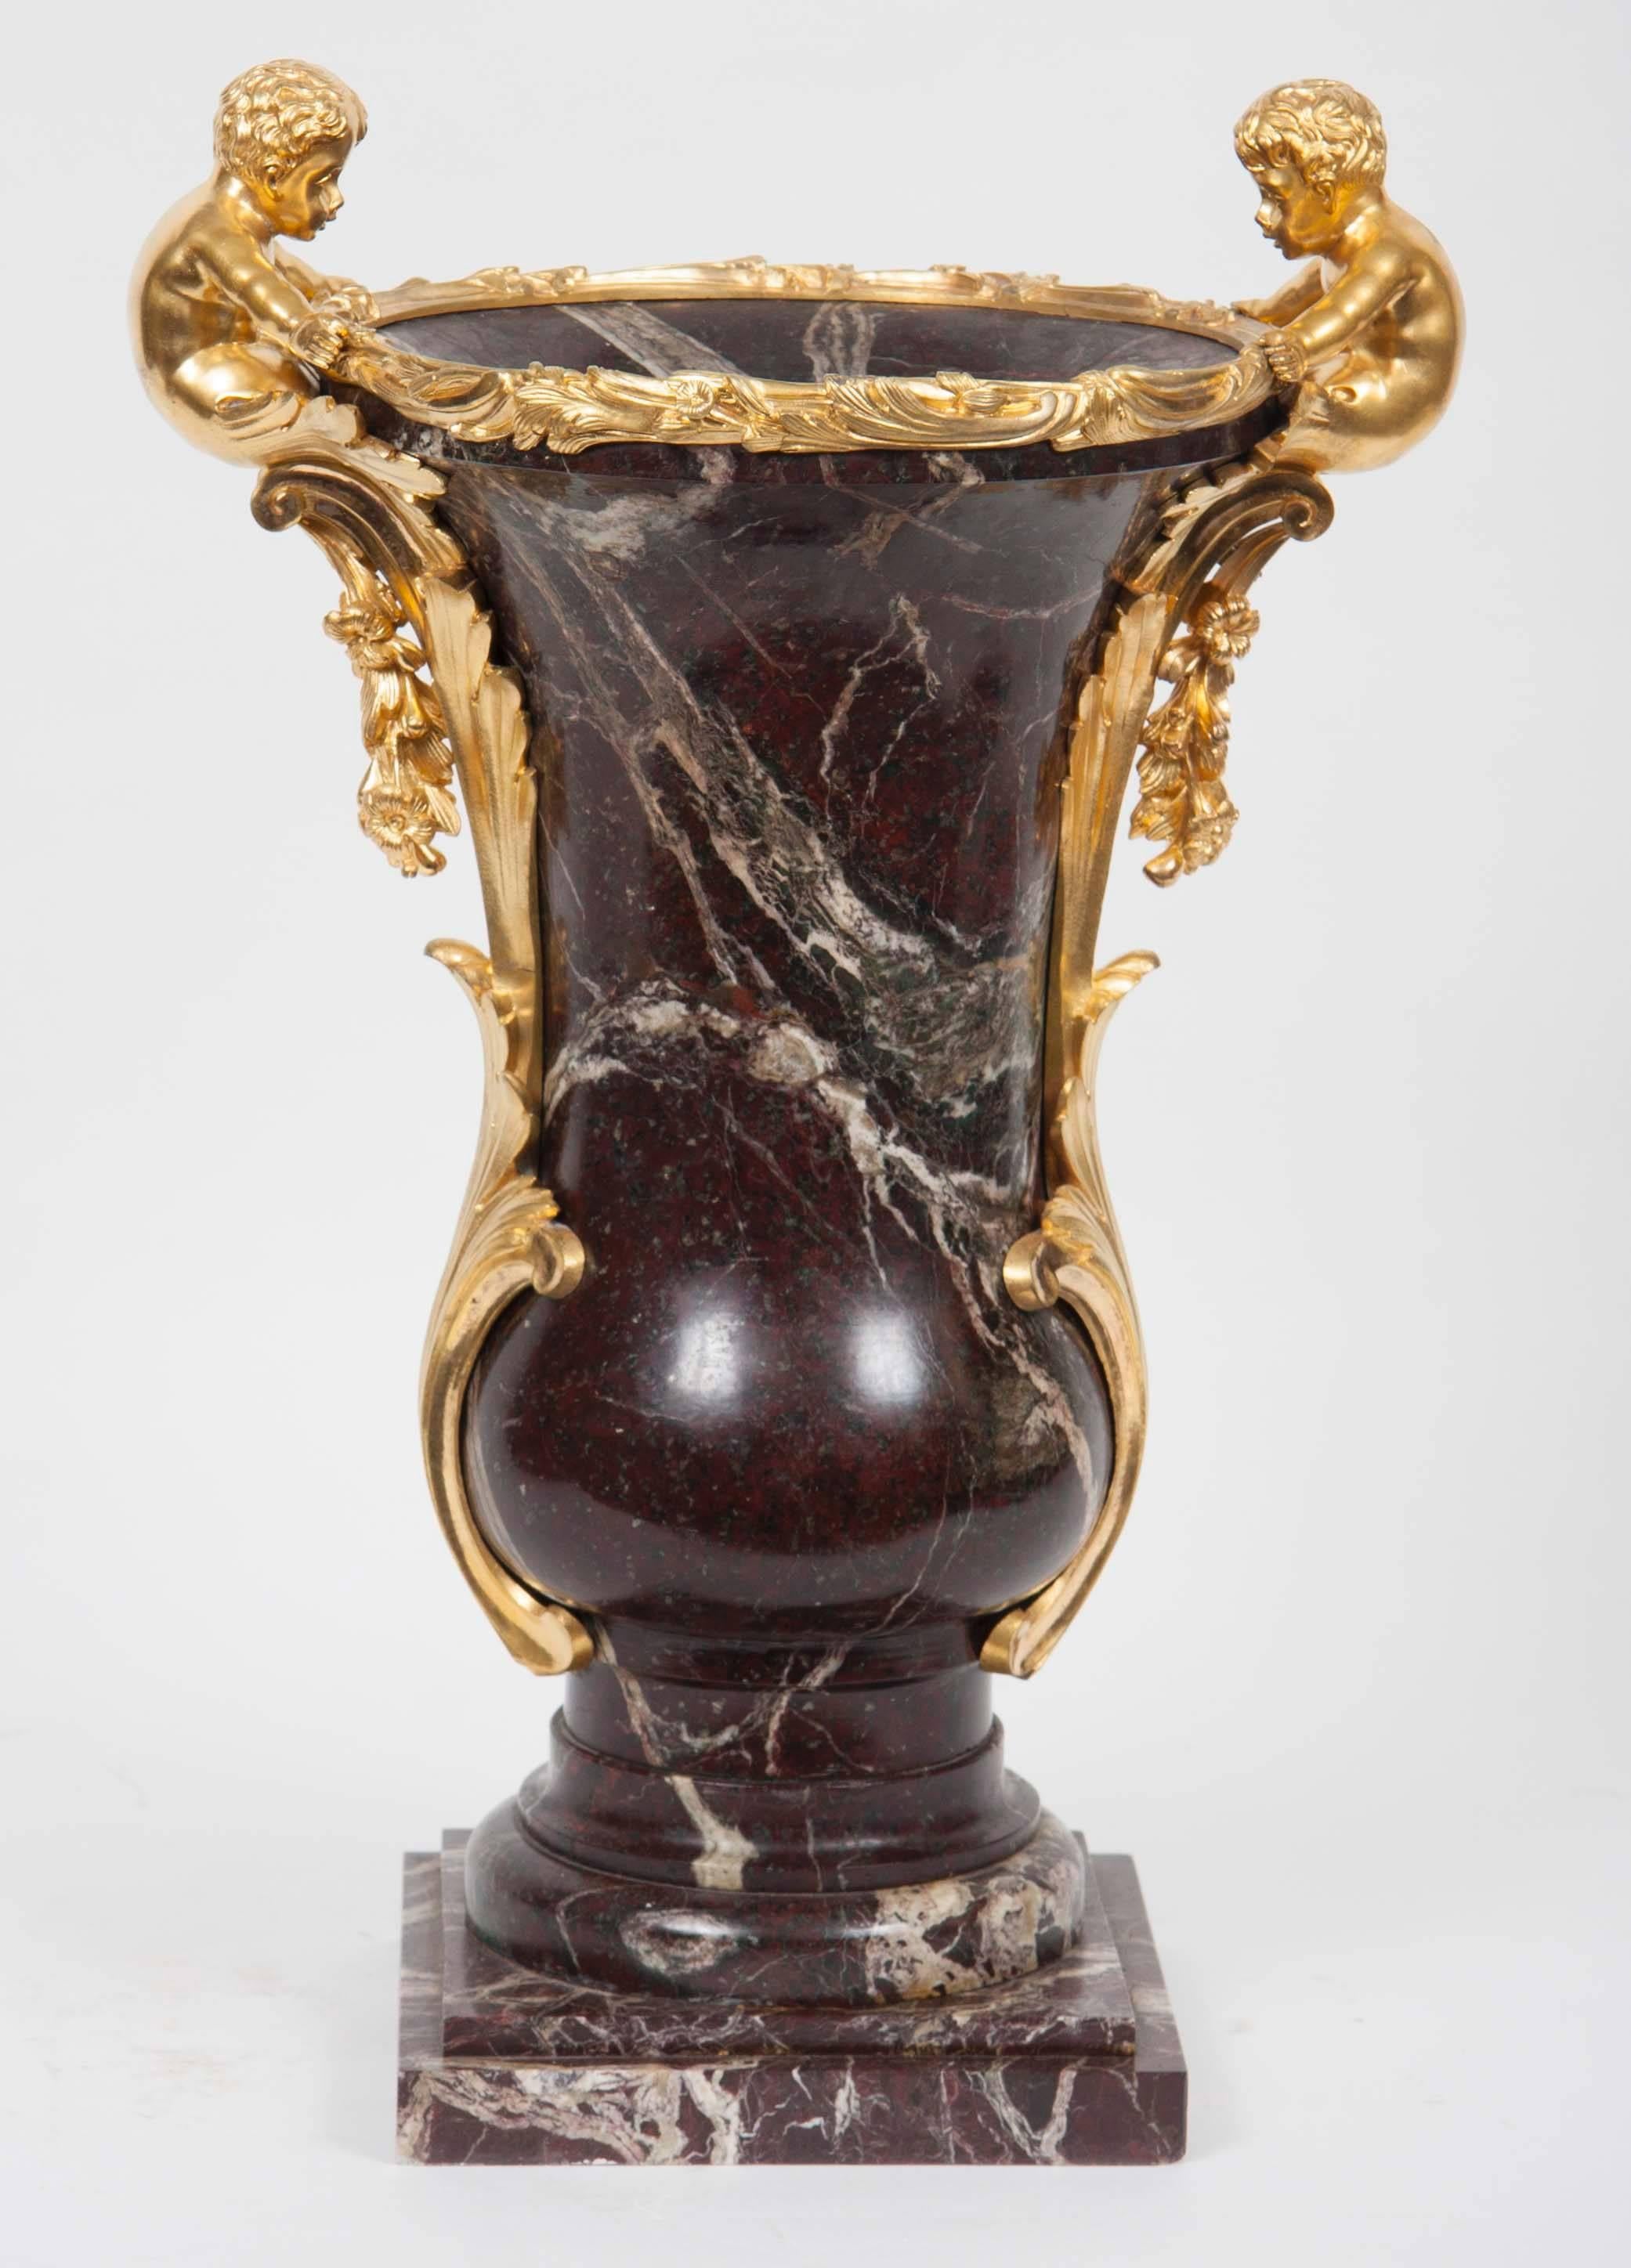 Pair of ormolu mounted marble vases with ornate gilt bronze leafing and figural mounts framing the urns.
France, 19th century.
Measures: 20-1/2 in. (52cm) height.

NMA Inv. 454